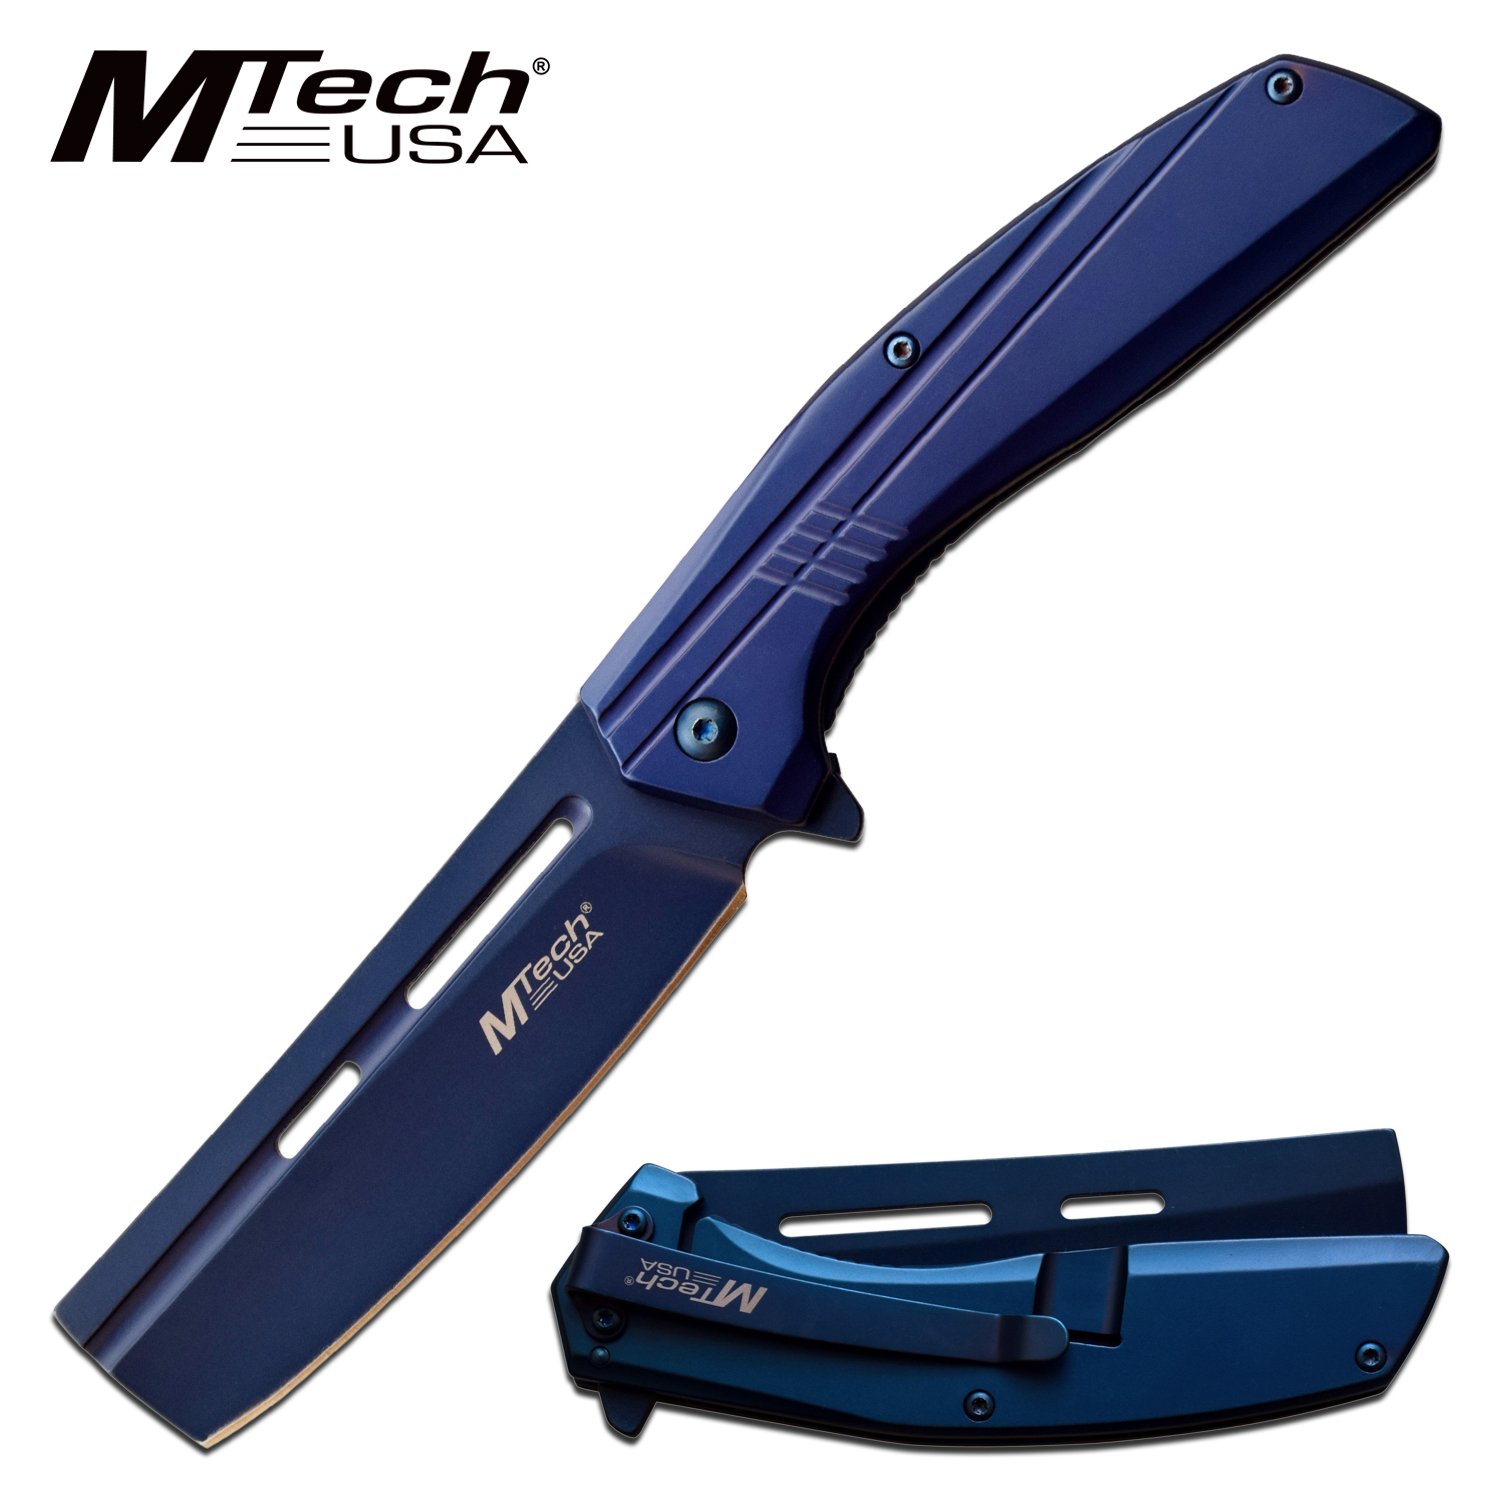 Spring-Assist Folding Knife Mtech 3.5in. Cleaver Blade Stainless Steel - Blue